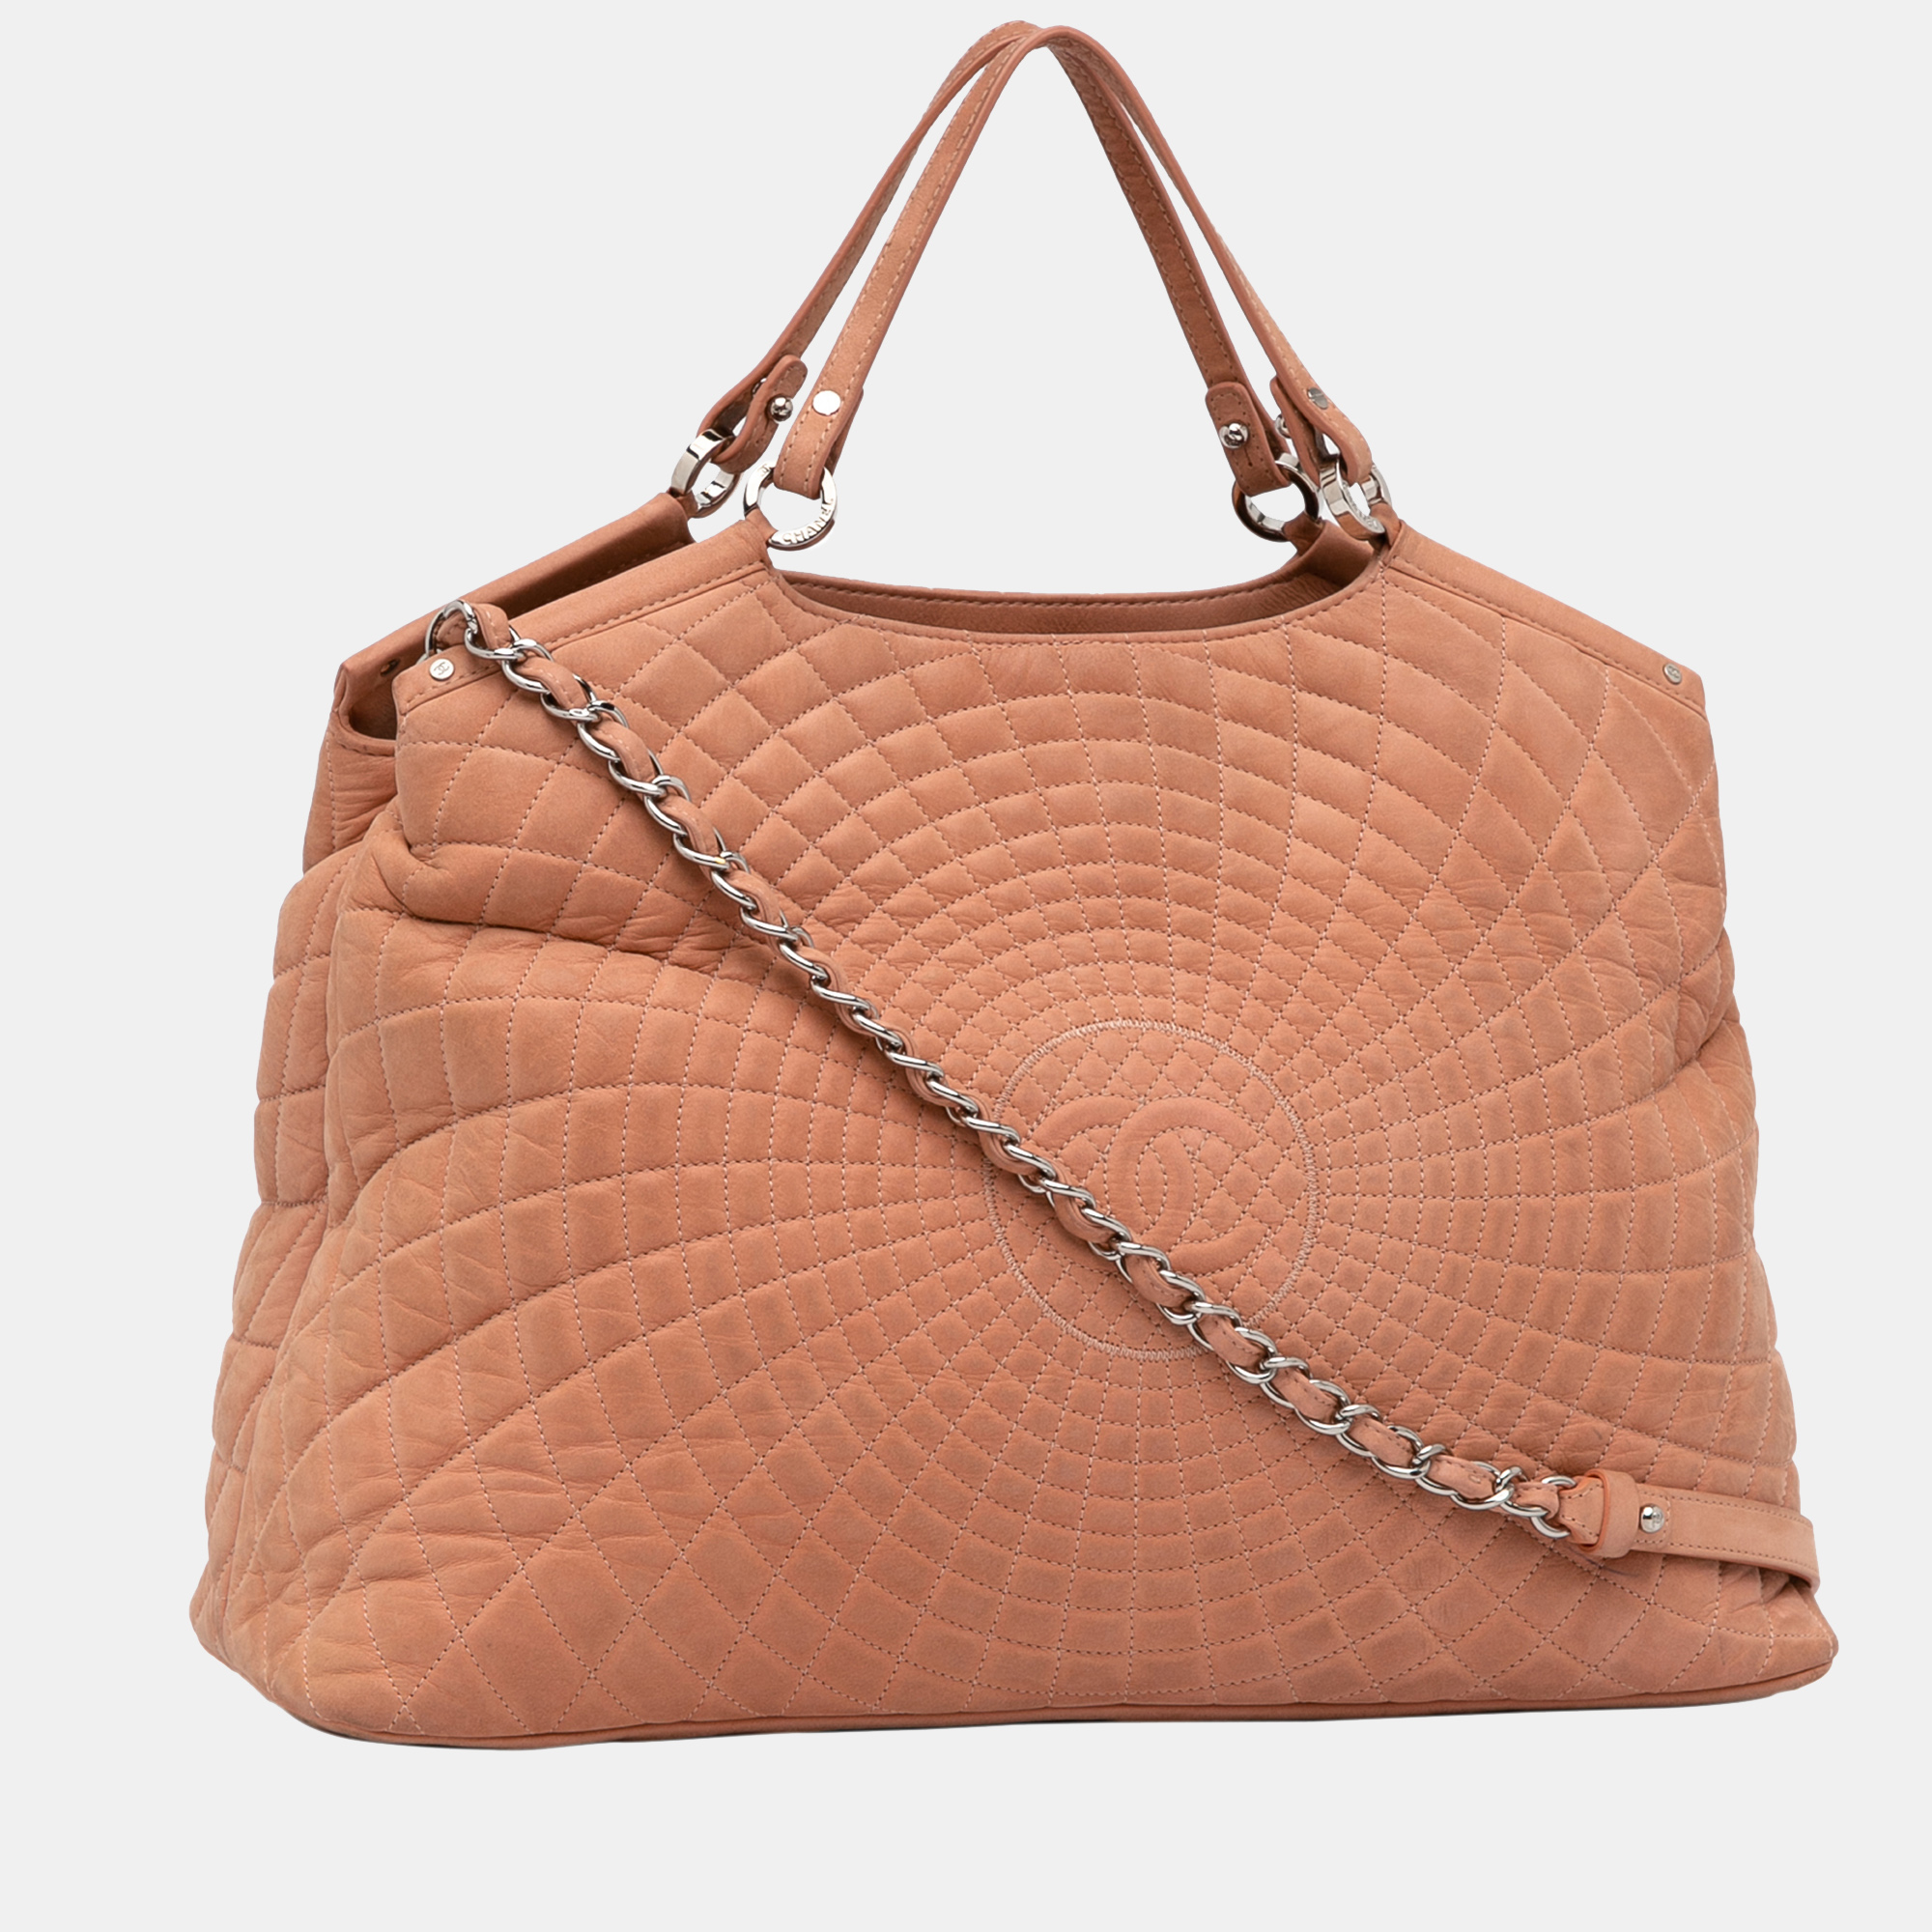 

Chanel Pink Sea Hit Quilted Leather Satchel